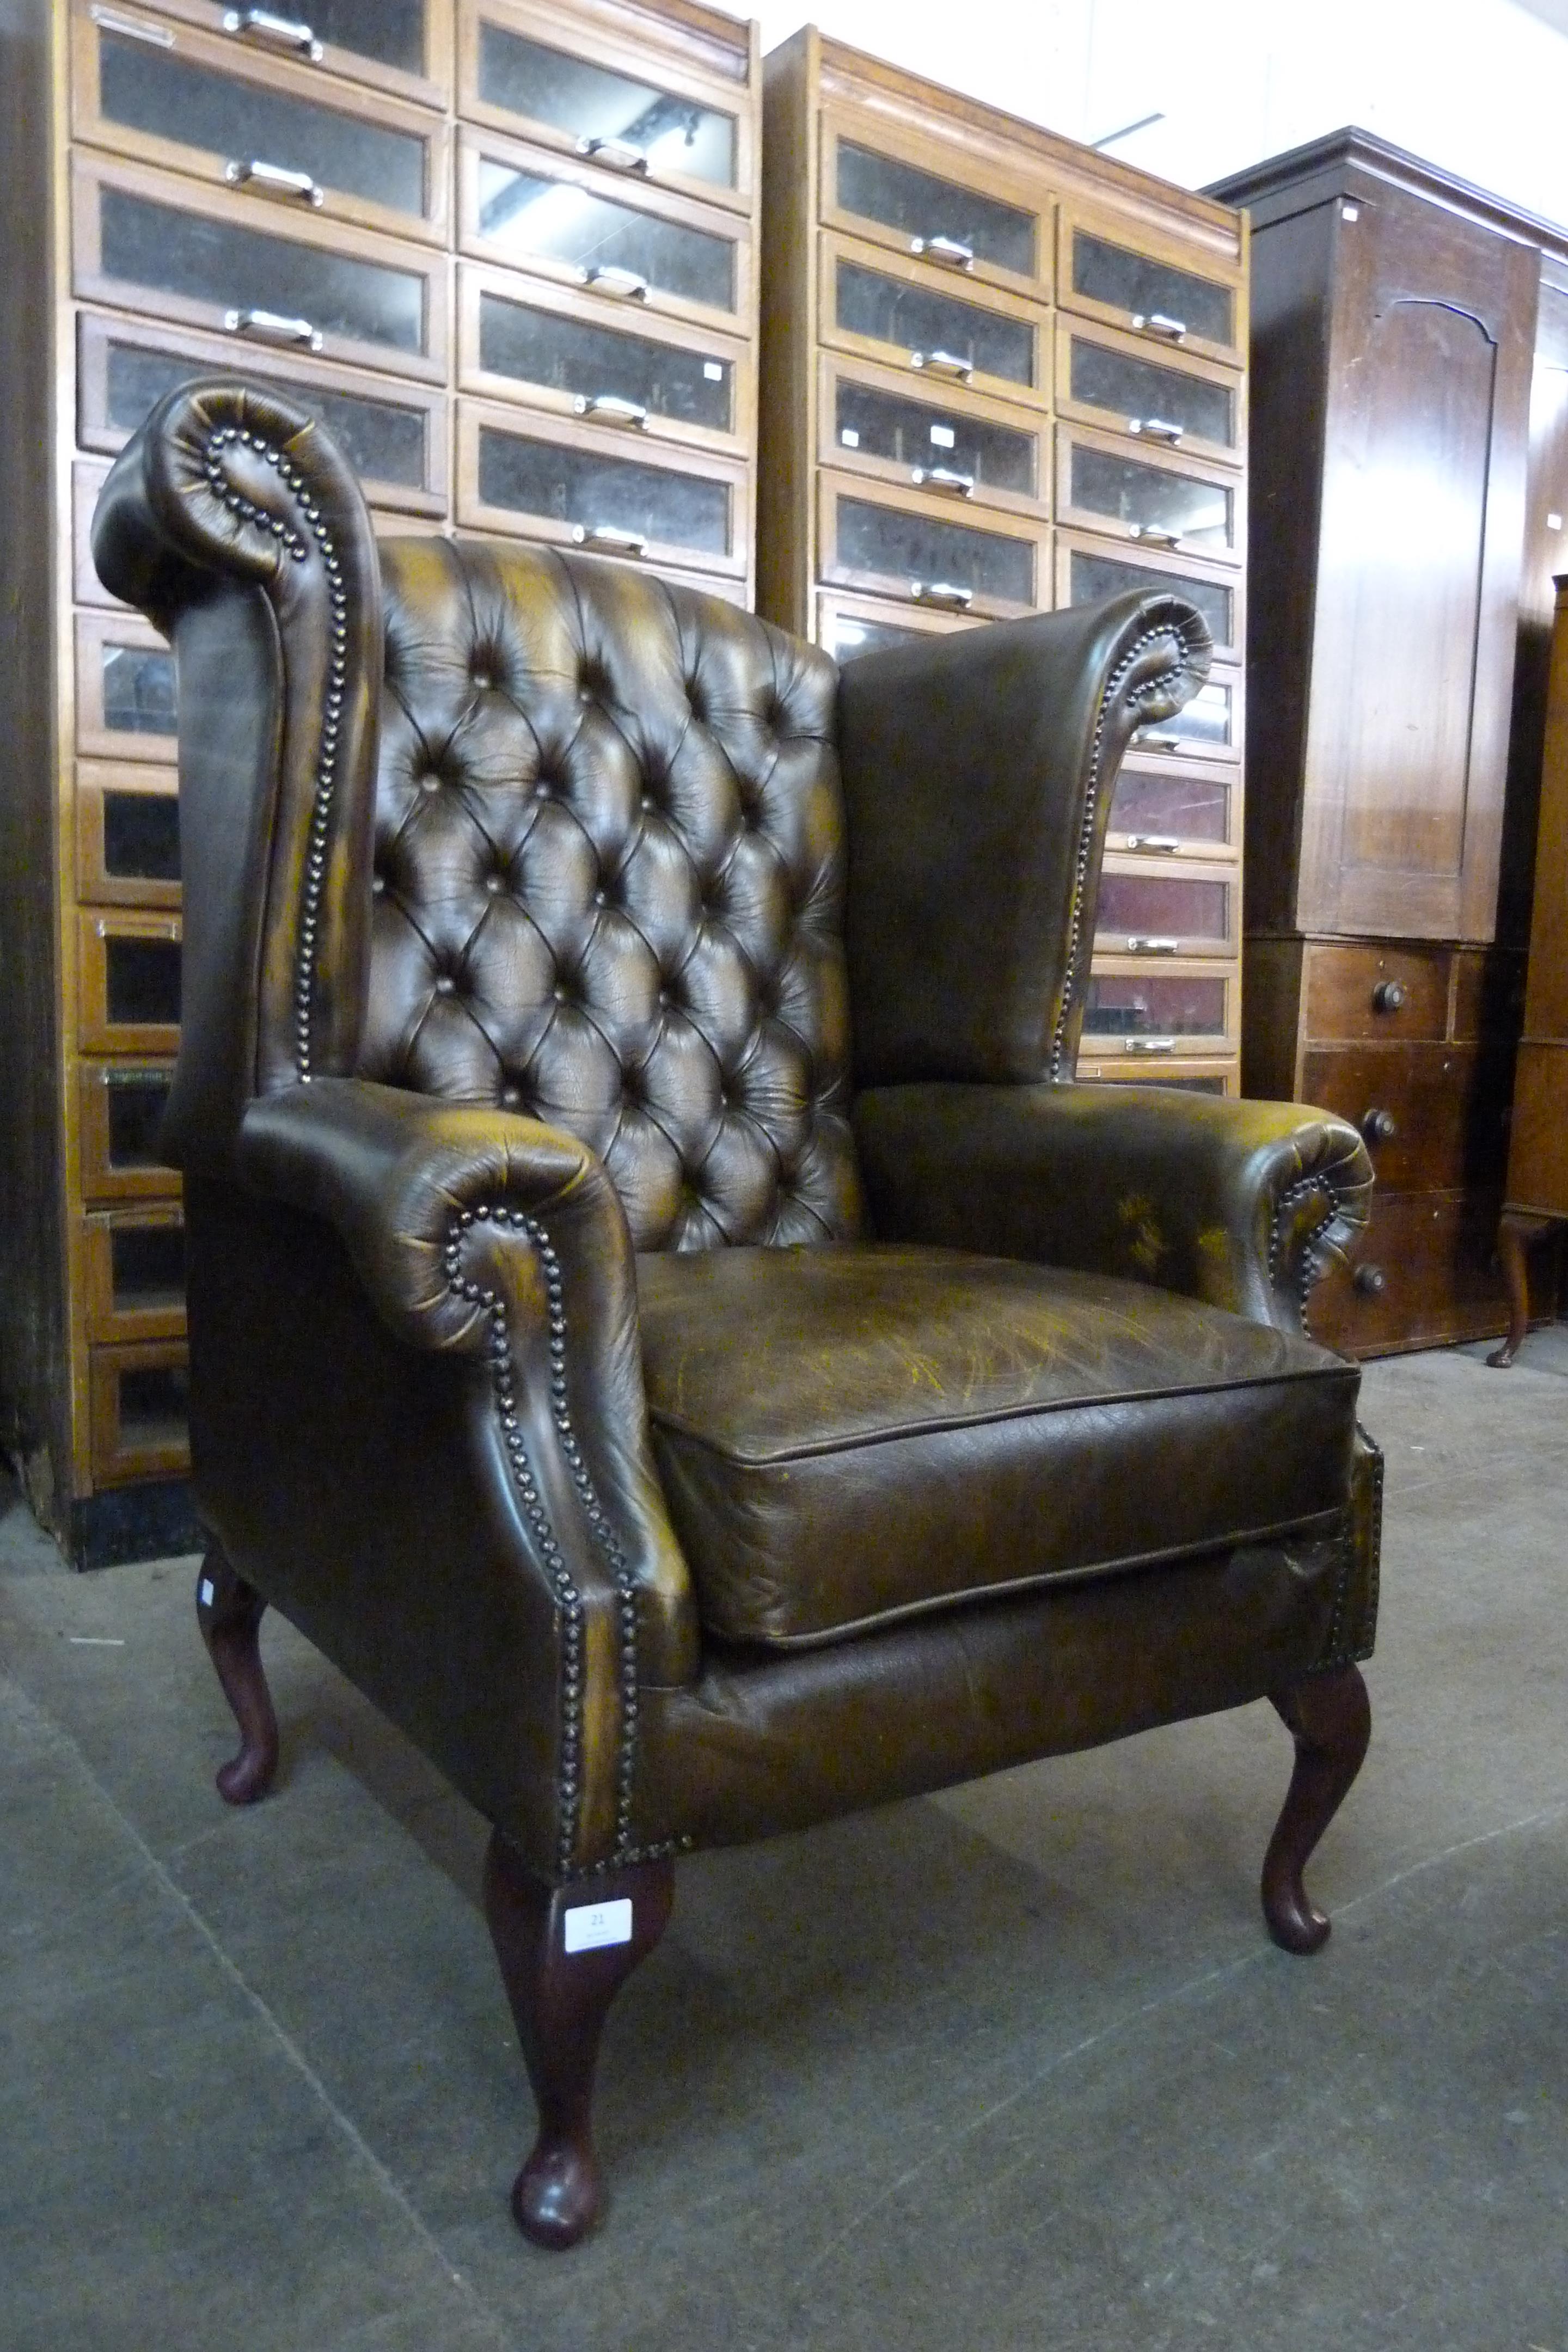 An olive green Chesterfield wingback armchair